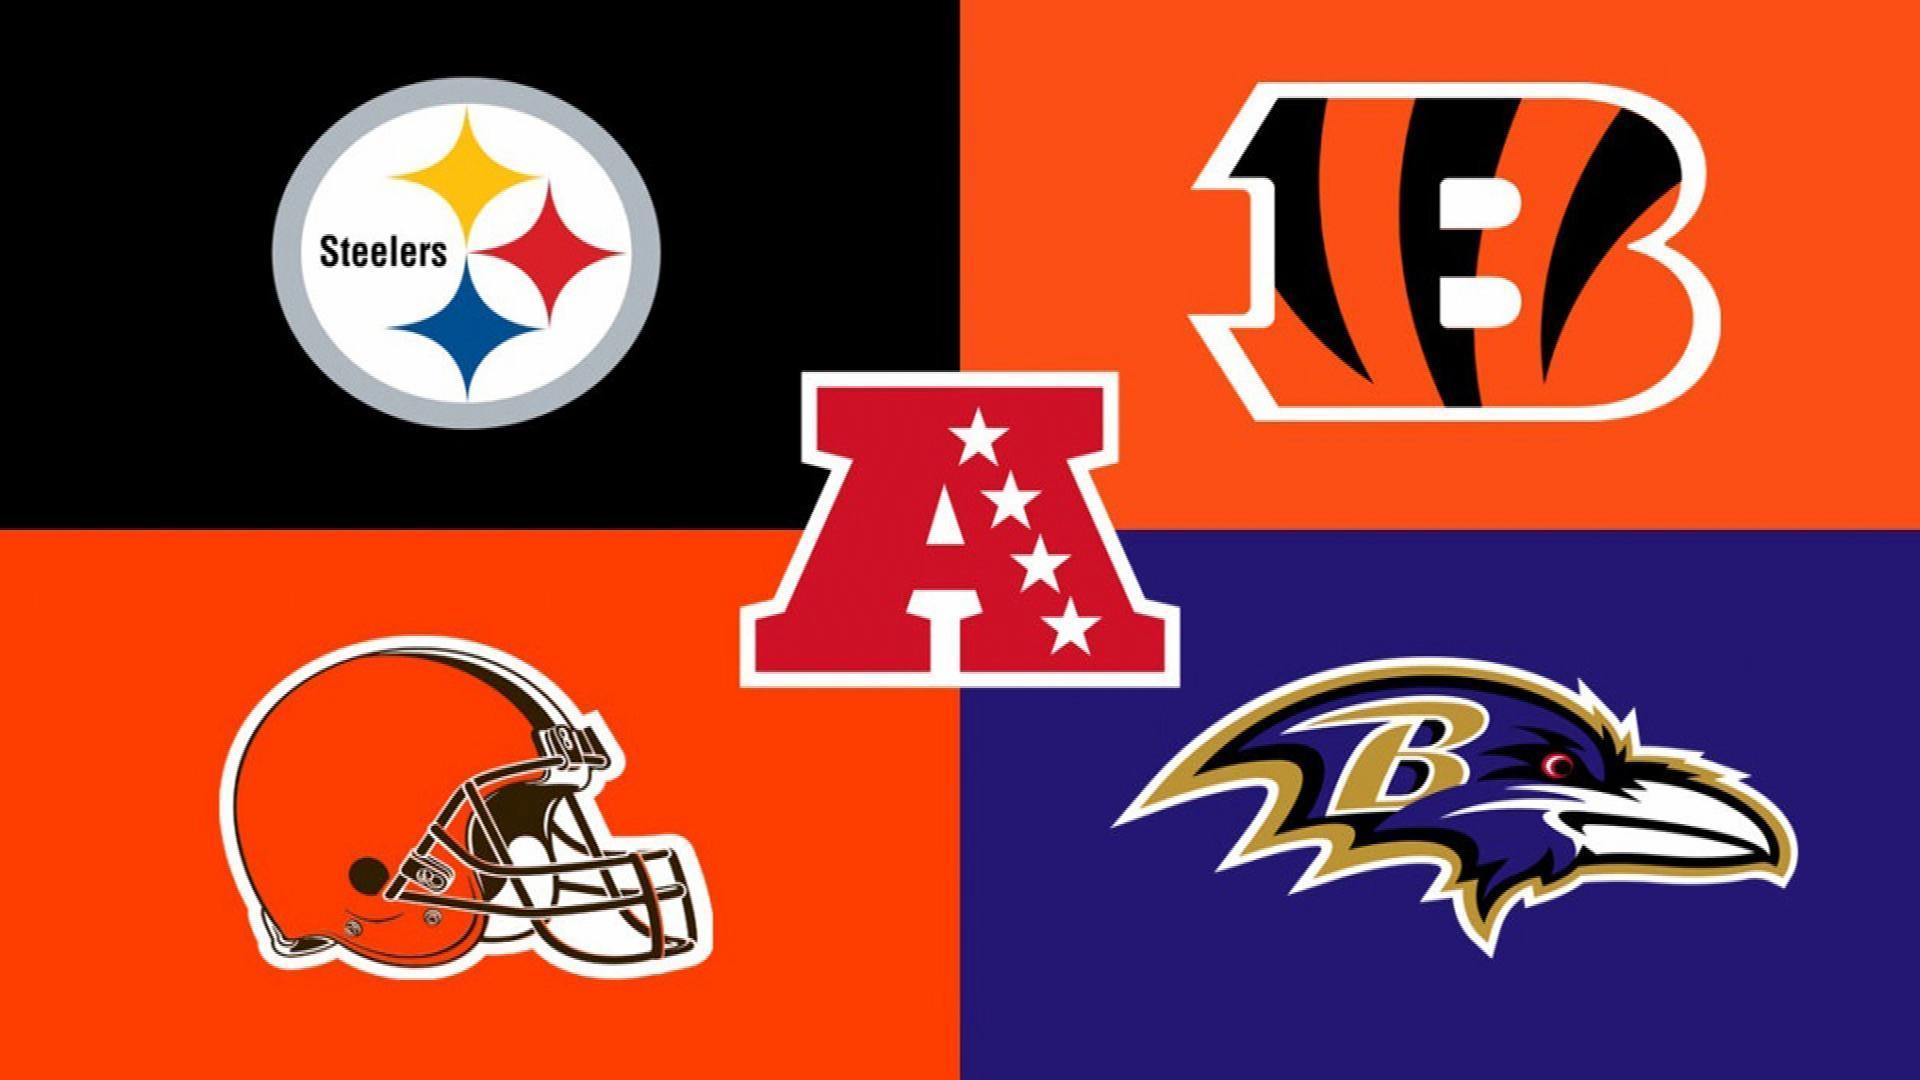 The AFC North